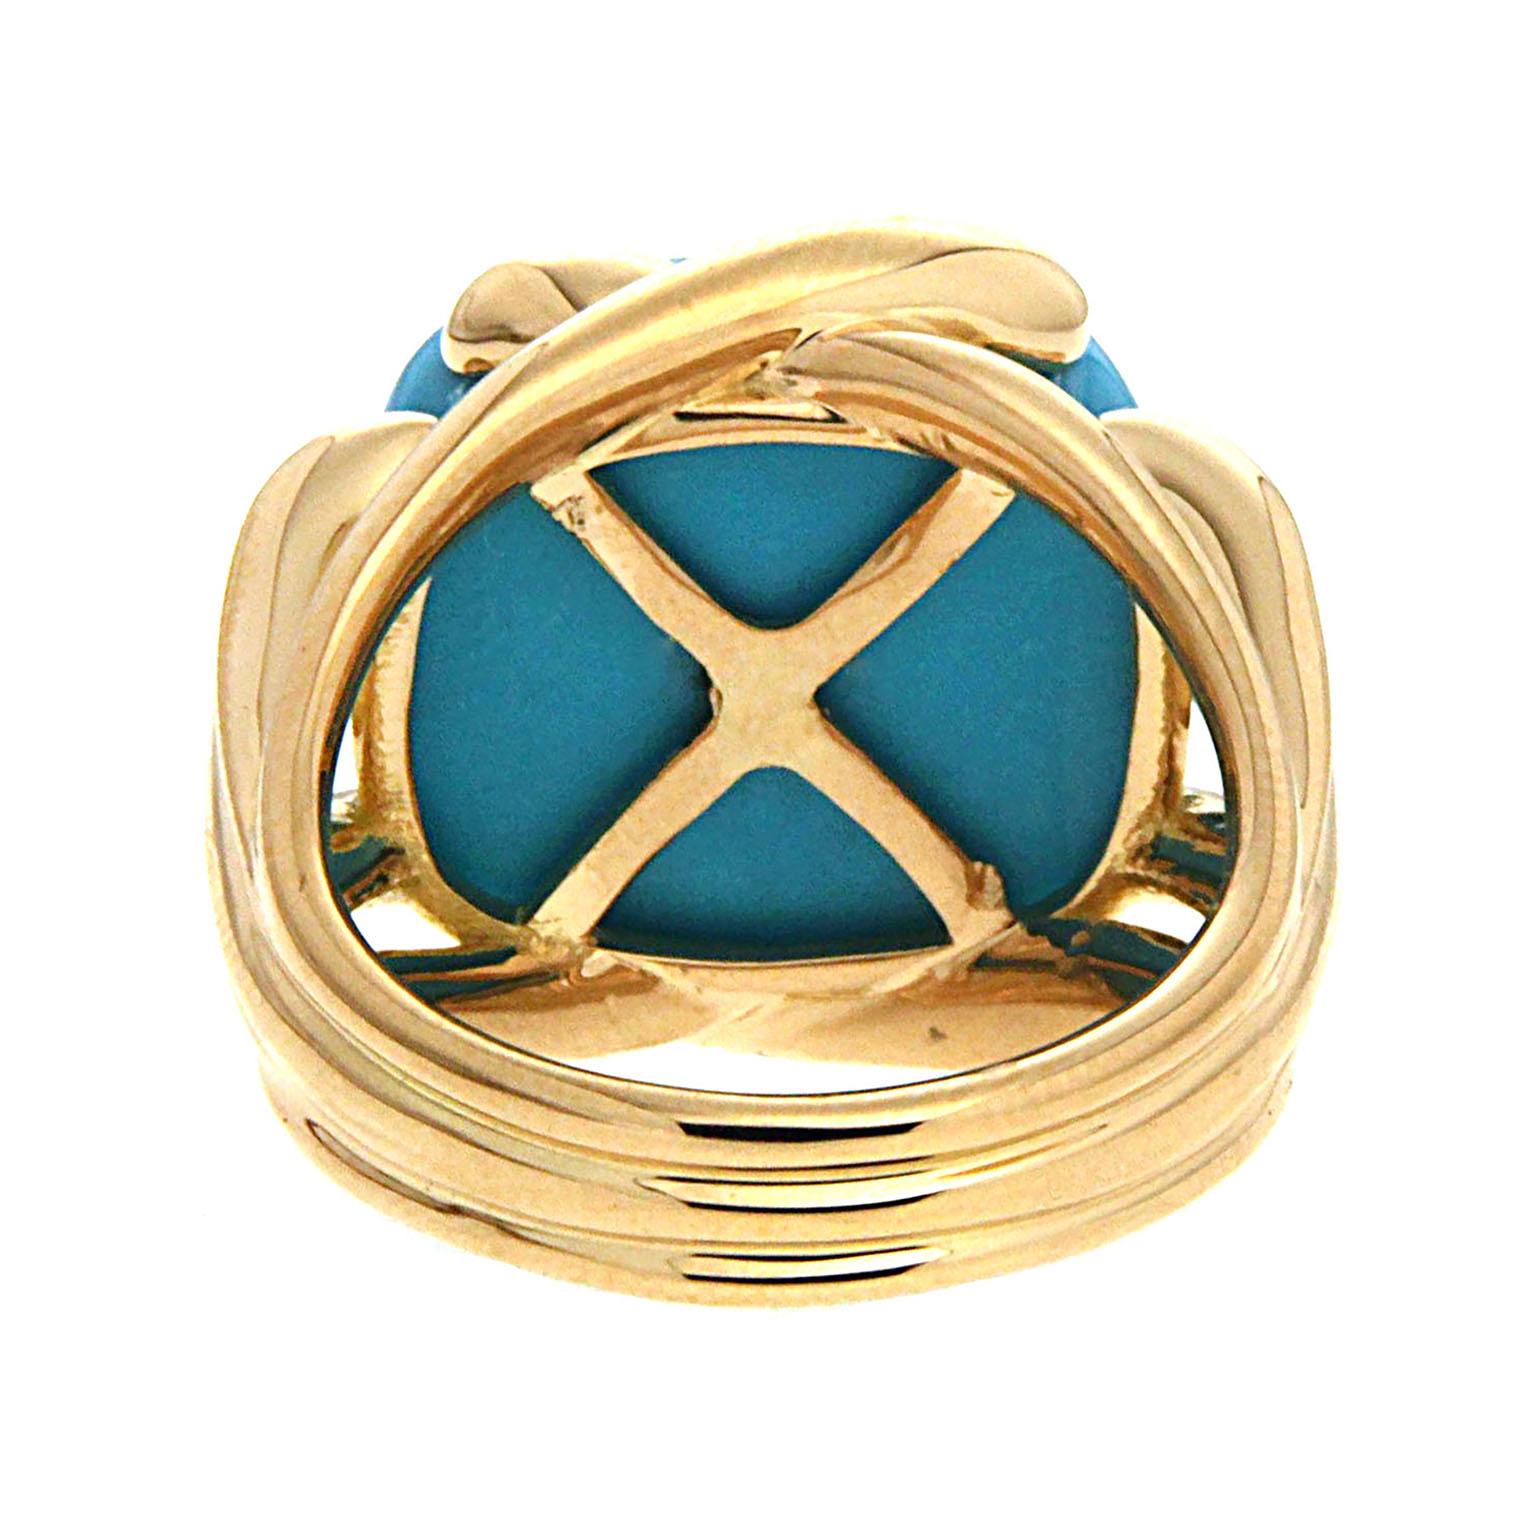 Valentin Magro Fluted Criss Cross Cushion Turquoise Sleeping Beauty Ring 1